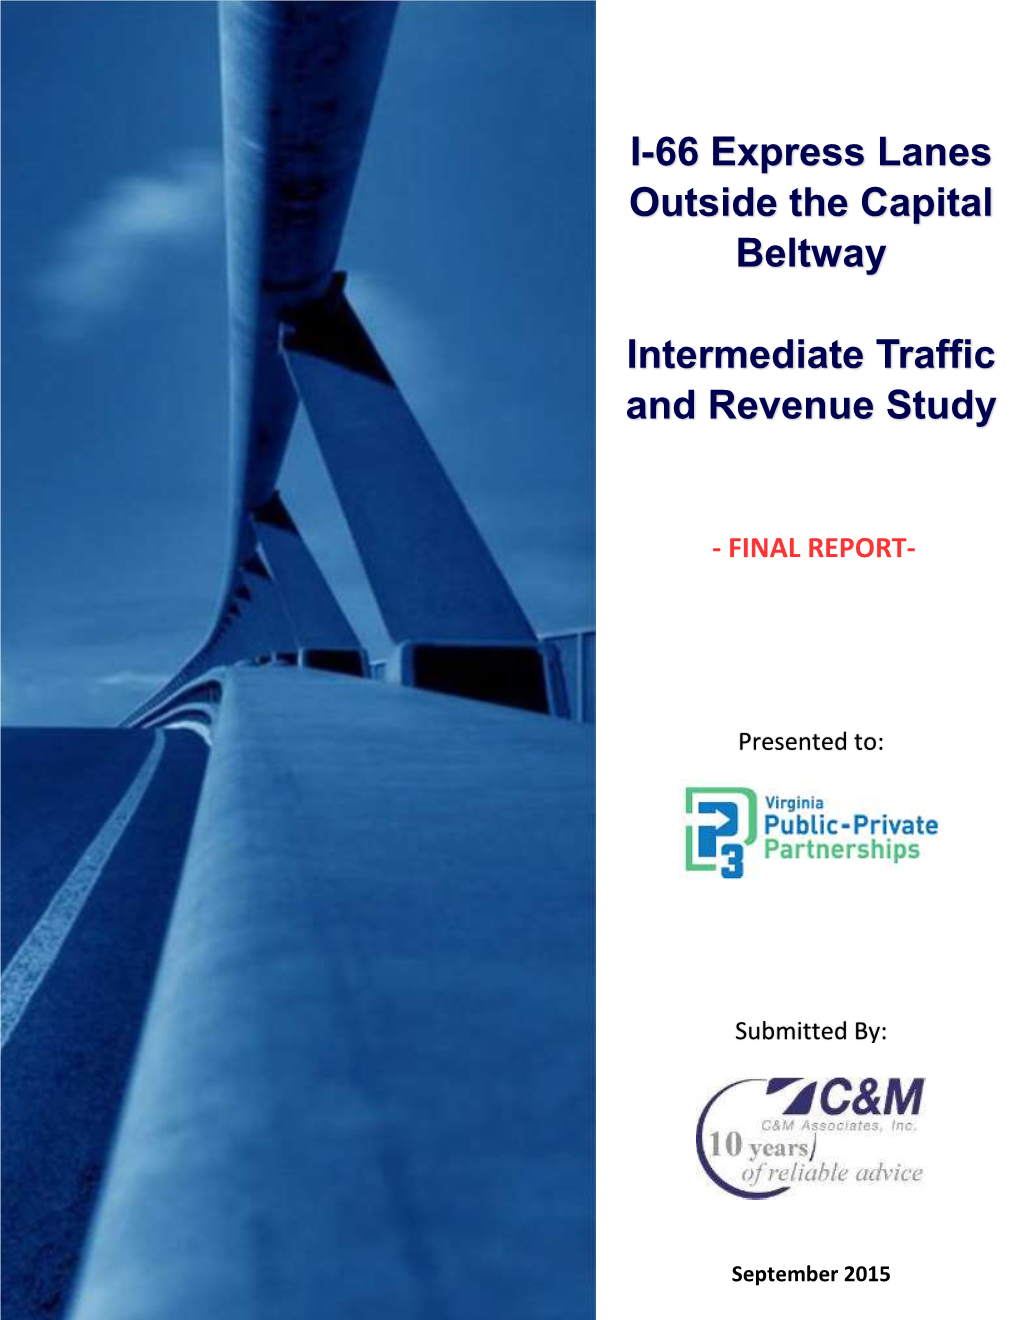 I-66 Express Lanes Outside the Capital Beltway Intermediate Traffic and Revenue Study Final Report